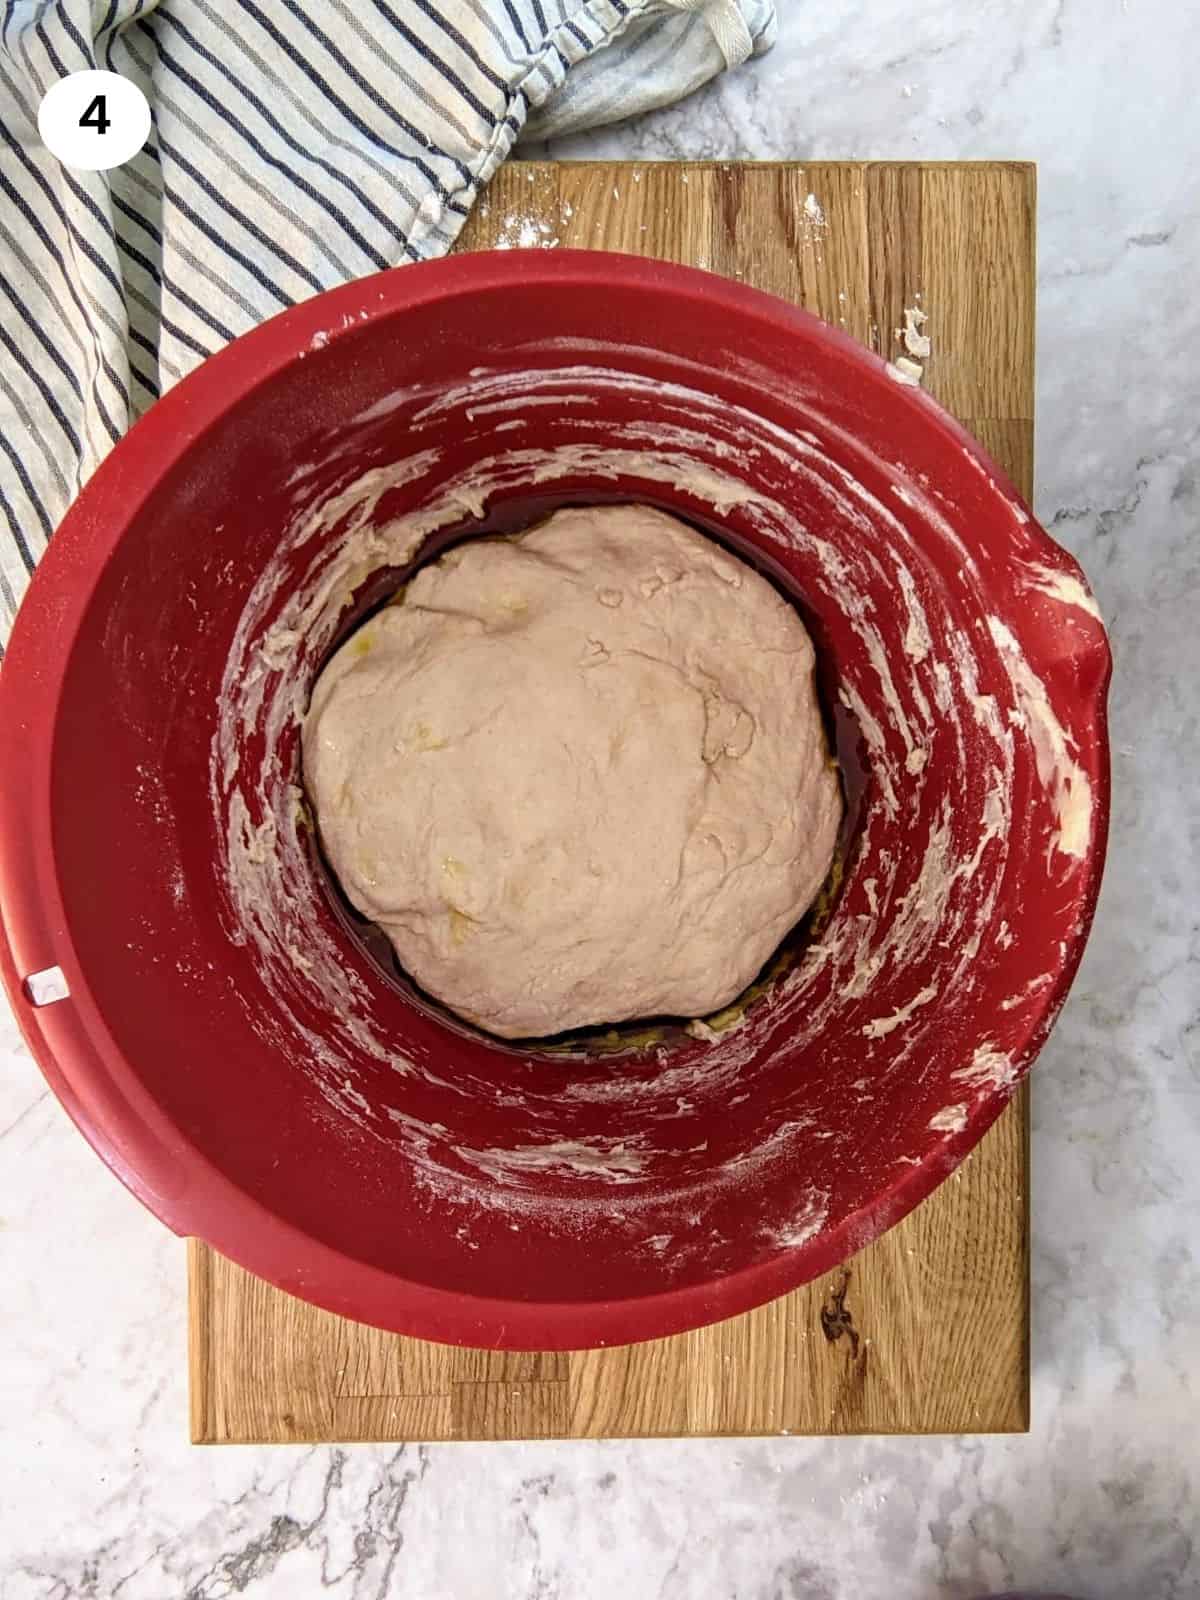 Dough in a bowl ready to rest for an hour